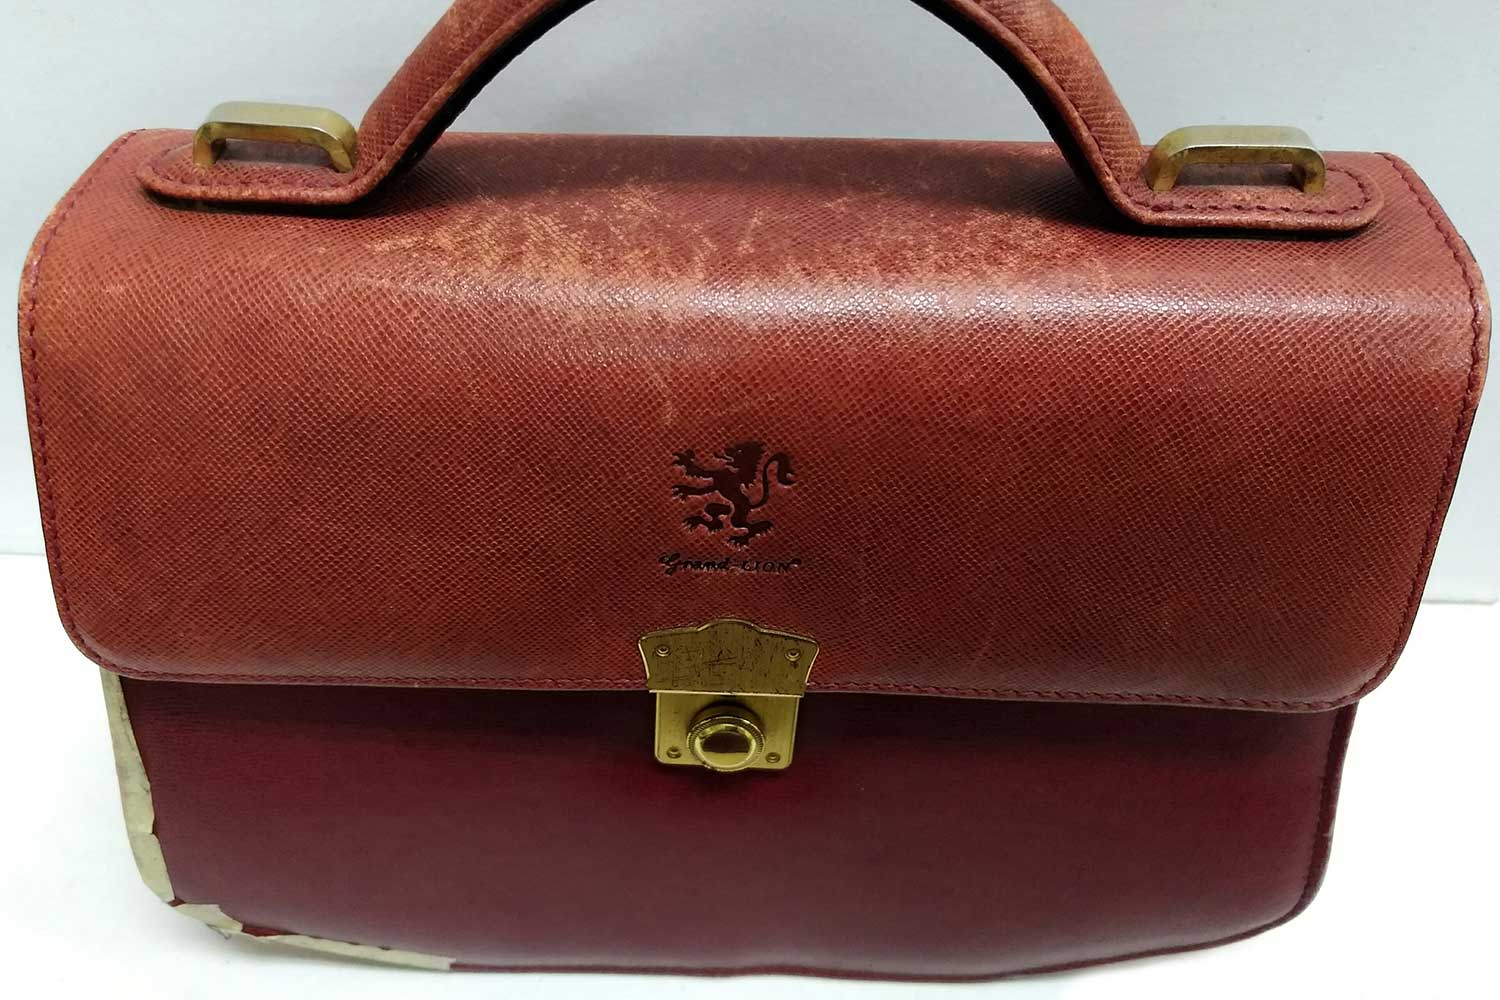 https://leather-pro.com/wp-content/uploads/2018/05/news_red_bag_before_1500.jpg